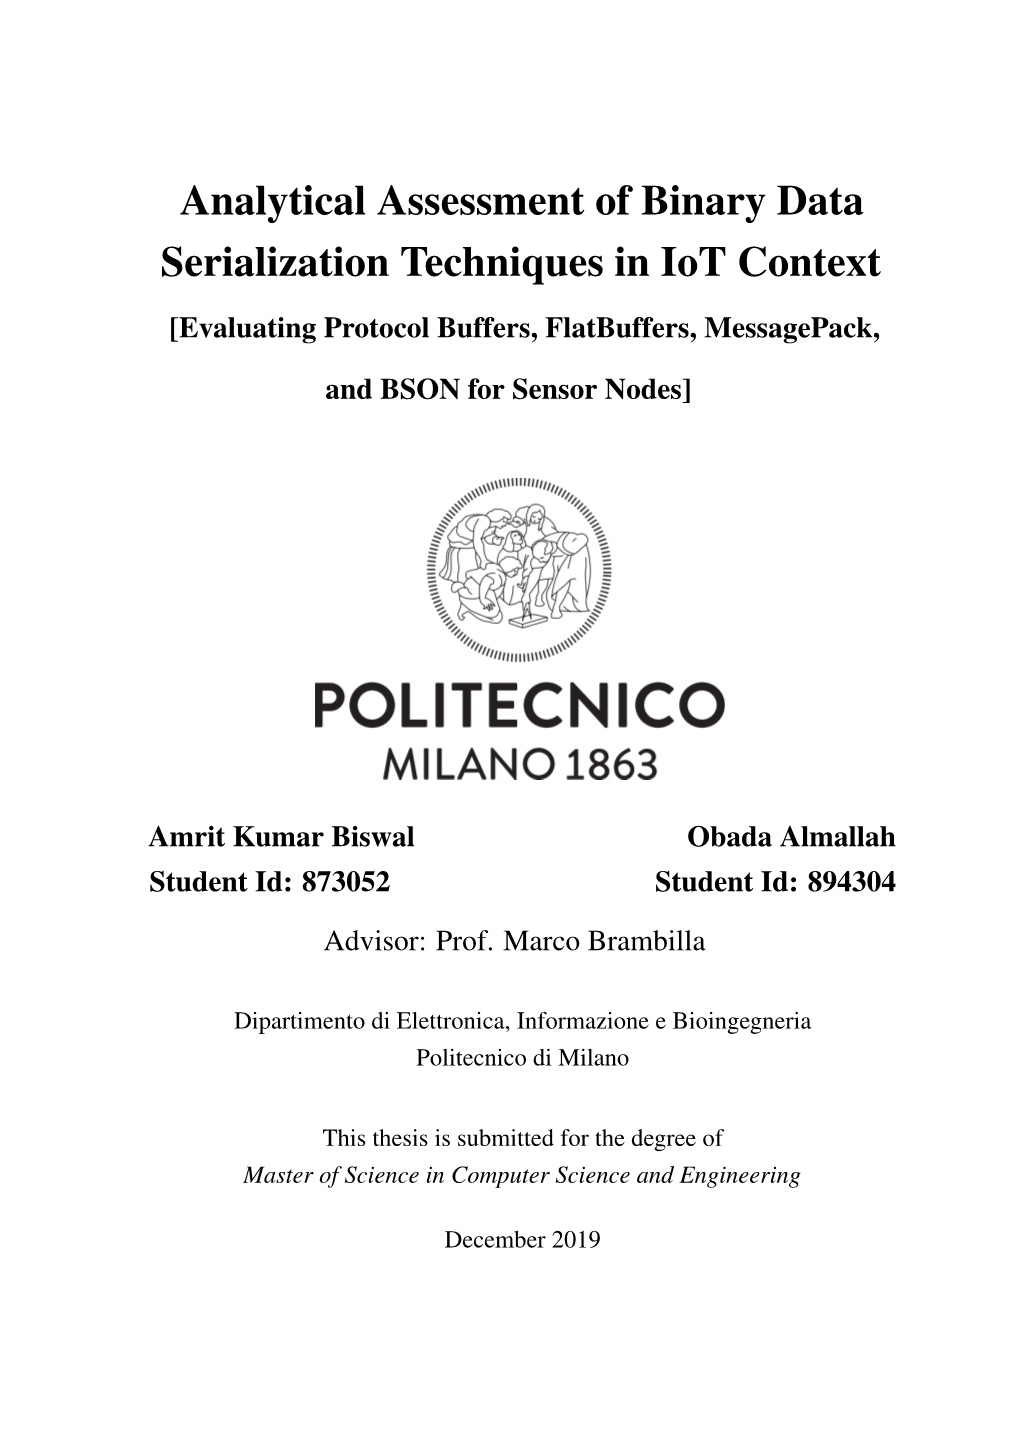 Analytical Assessment of Binary Data Serialization Techniques in Iot Context [Evaluating Protocol Buffers, Flatbuffers, Messagepack